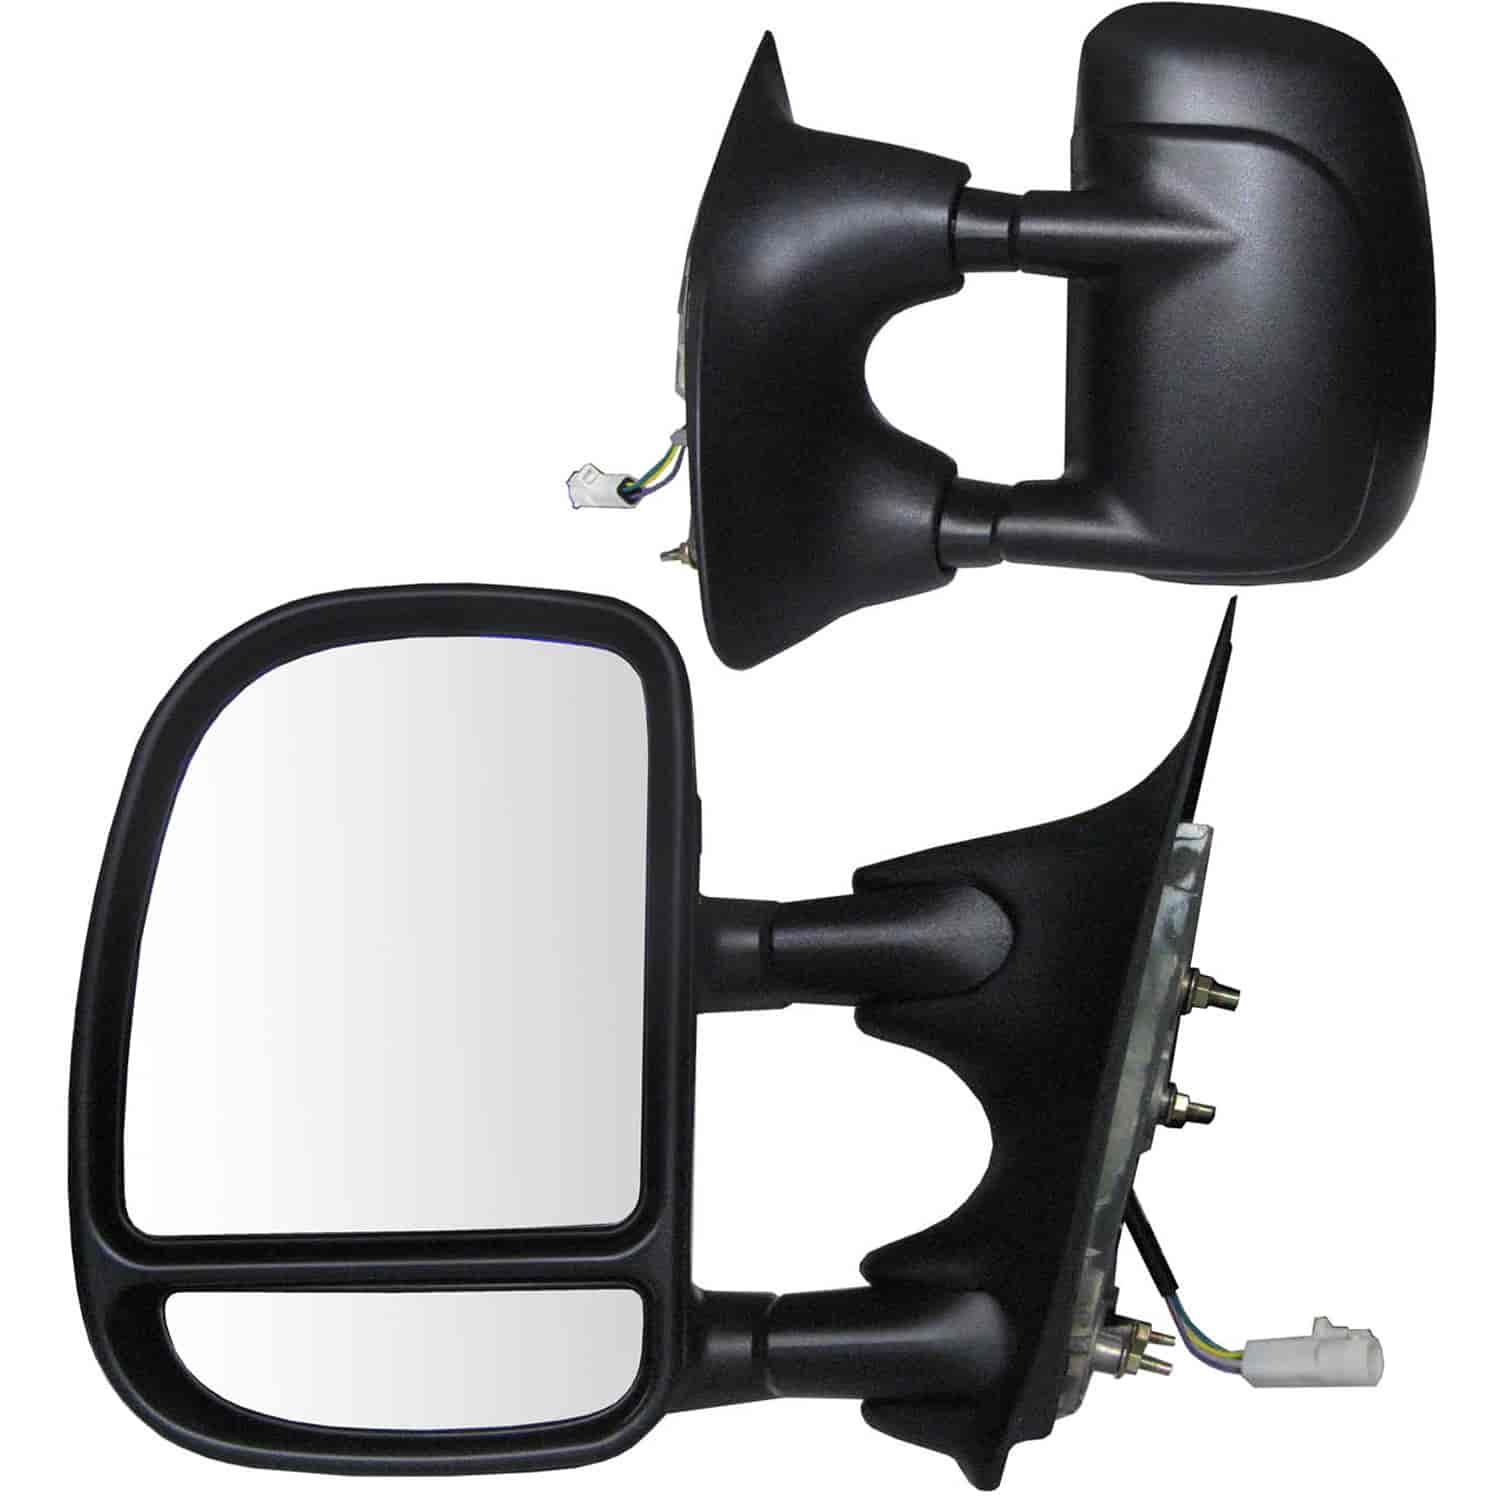 OEM Style Replacement Mirror Fits 1999 to 2000